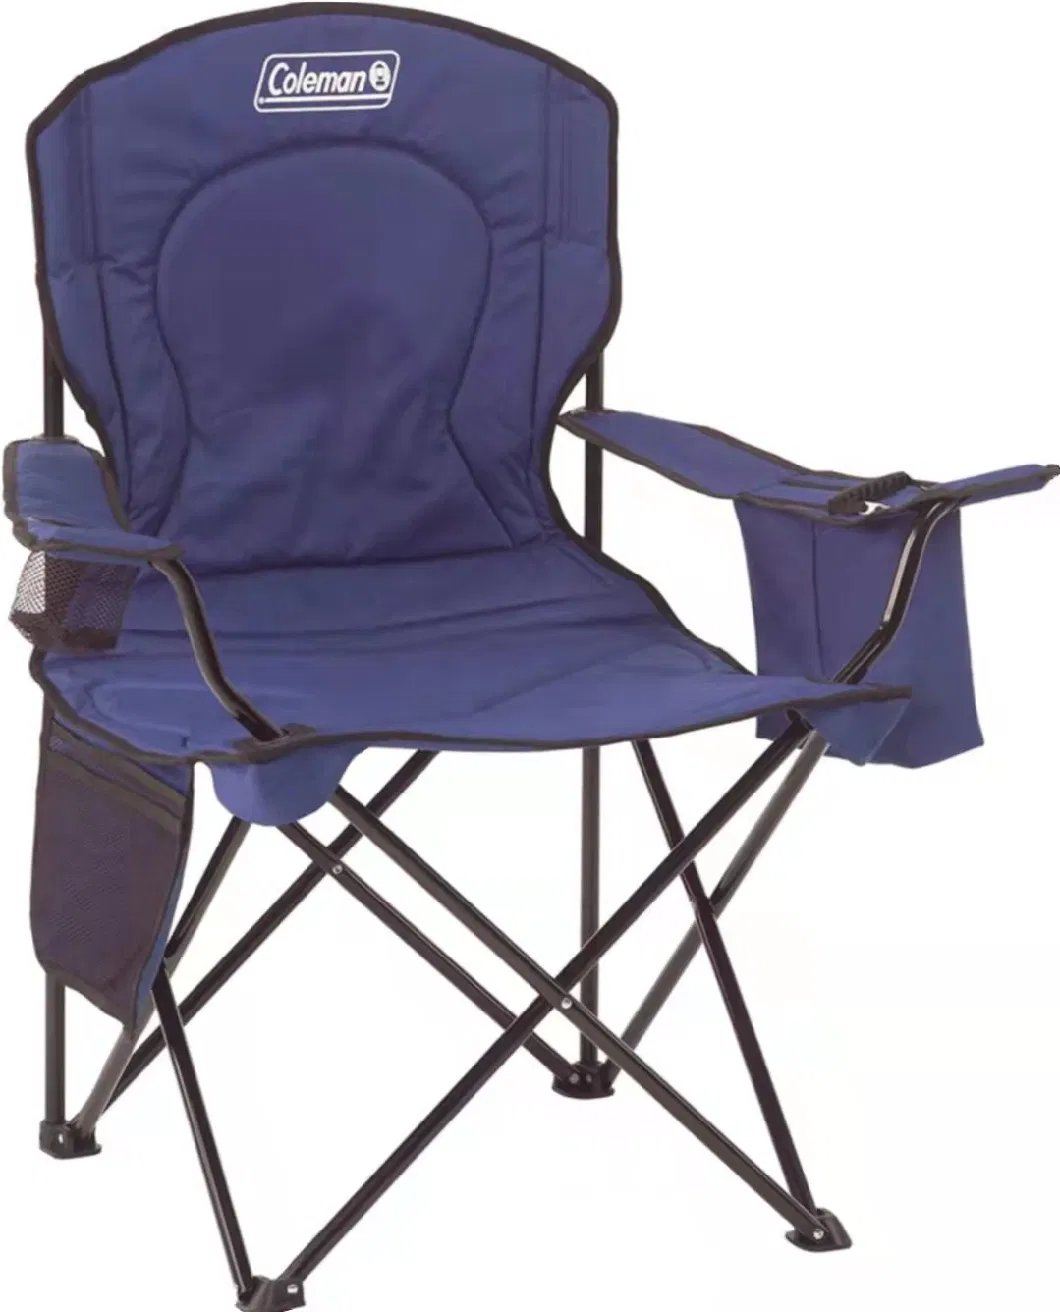 Camping Chair Outdoor Portable Folding Rocking Chair Large Heavy Duty Support Camping Chair